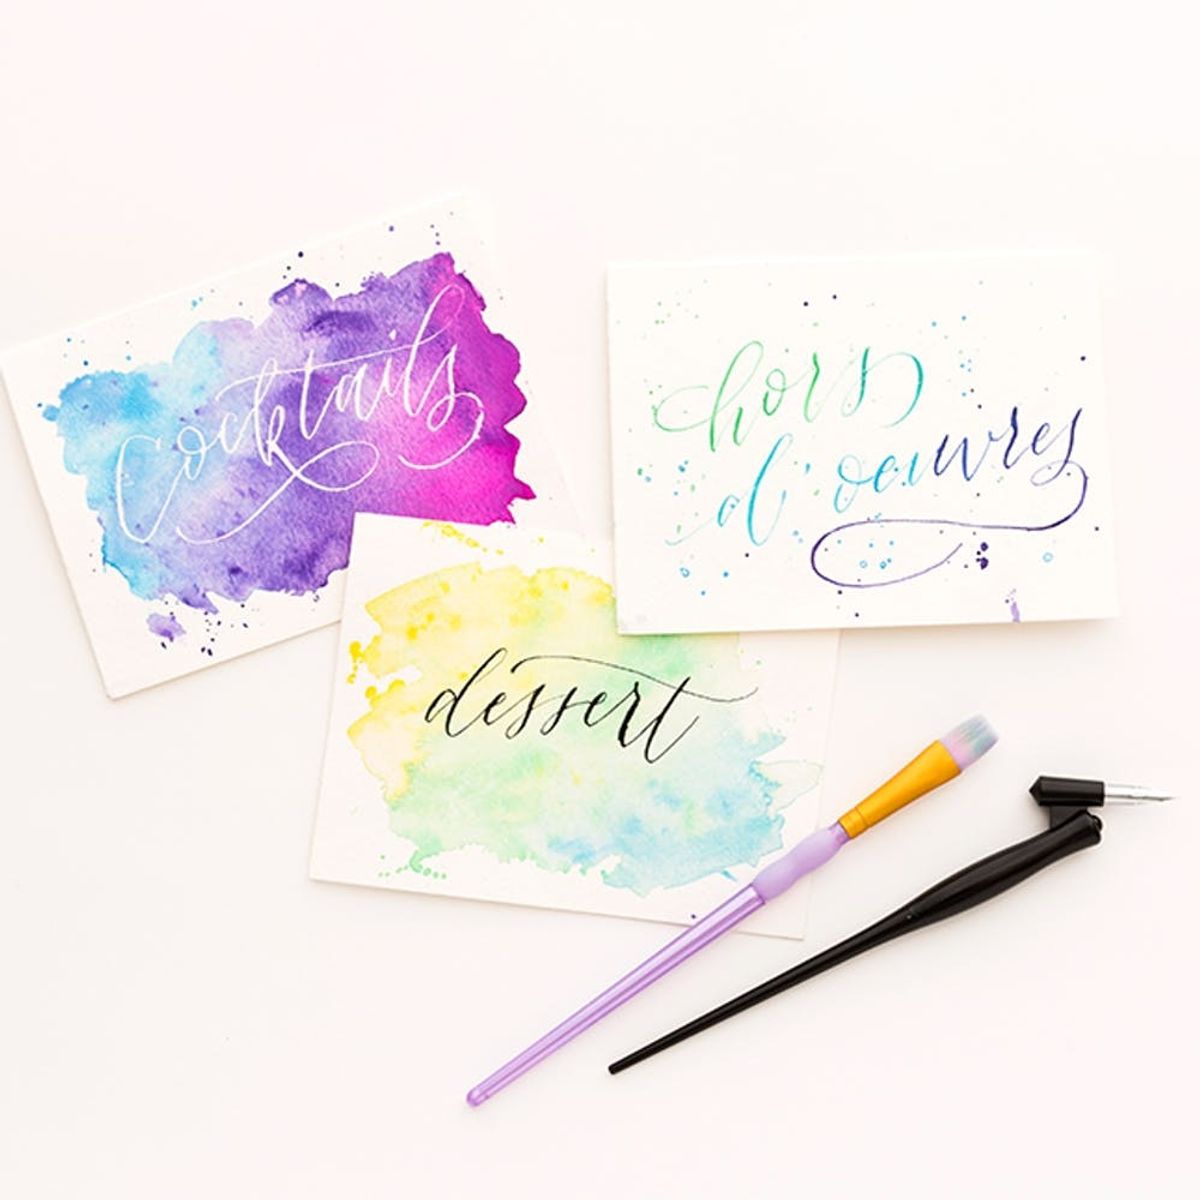 Our New Online Class Pairs Watercolor + Calligraphy for the Best Invites Ever